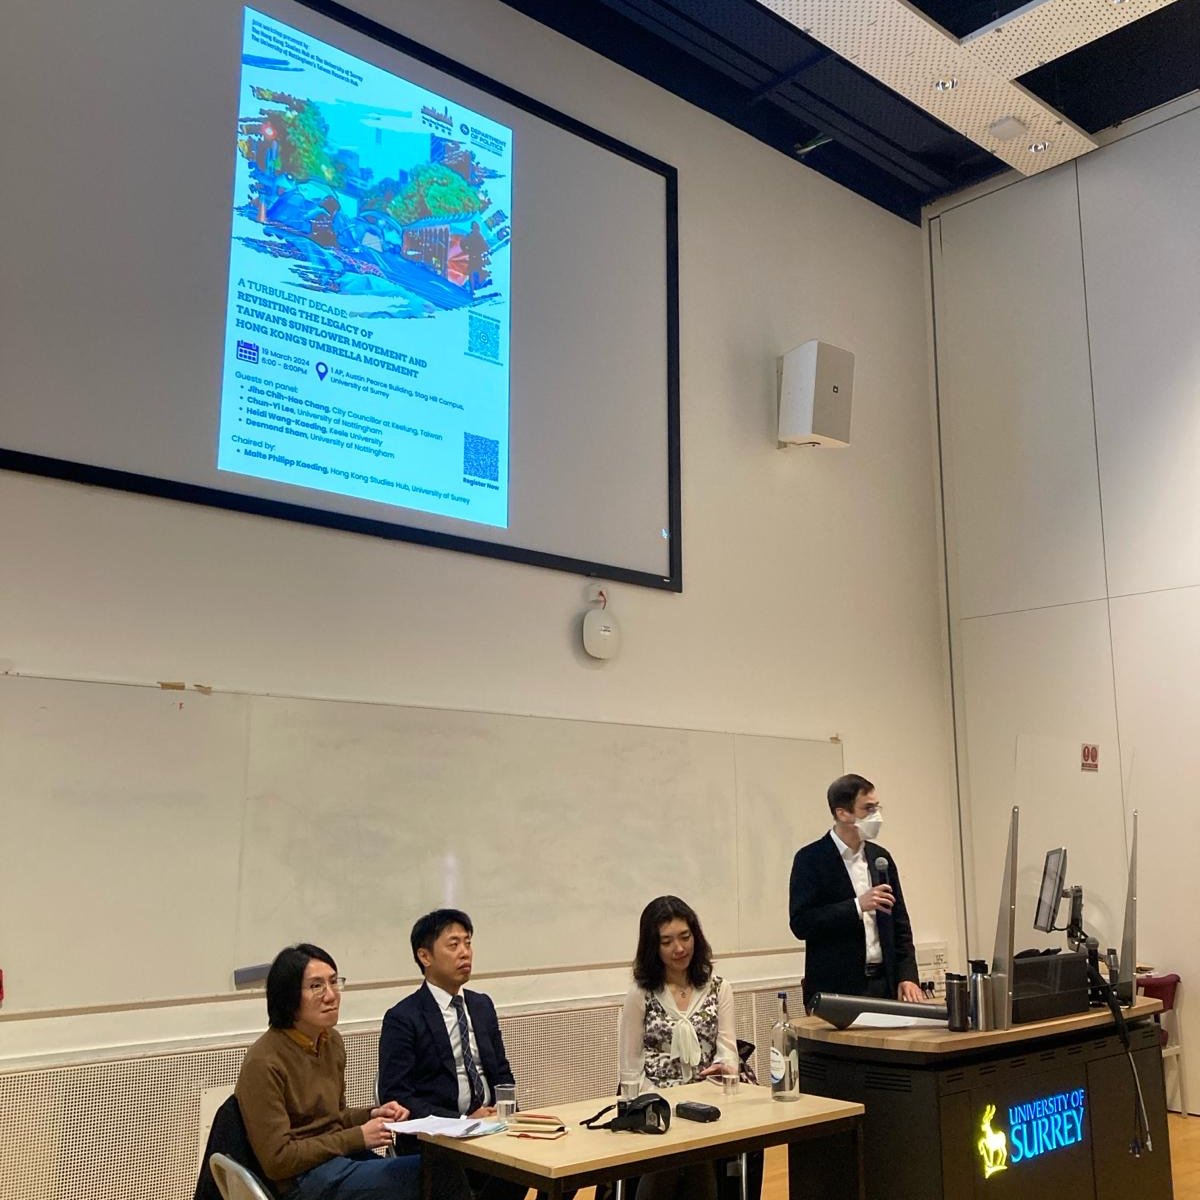 Dr Chun-yi Lee @NottsPolitics joined panellists Jiho Chih-Hao Chang, City Councilor at Keelung, Taiwan, Dr Malte Kaeding, @SurreyPolitics and Dr Desmond Sham UoN, for 'The Legacy of Taiwan's Sunflower Movement and Hong Kong's Umbrella Movement' @SurreyPolitics